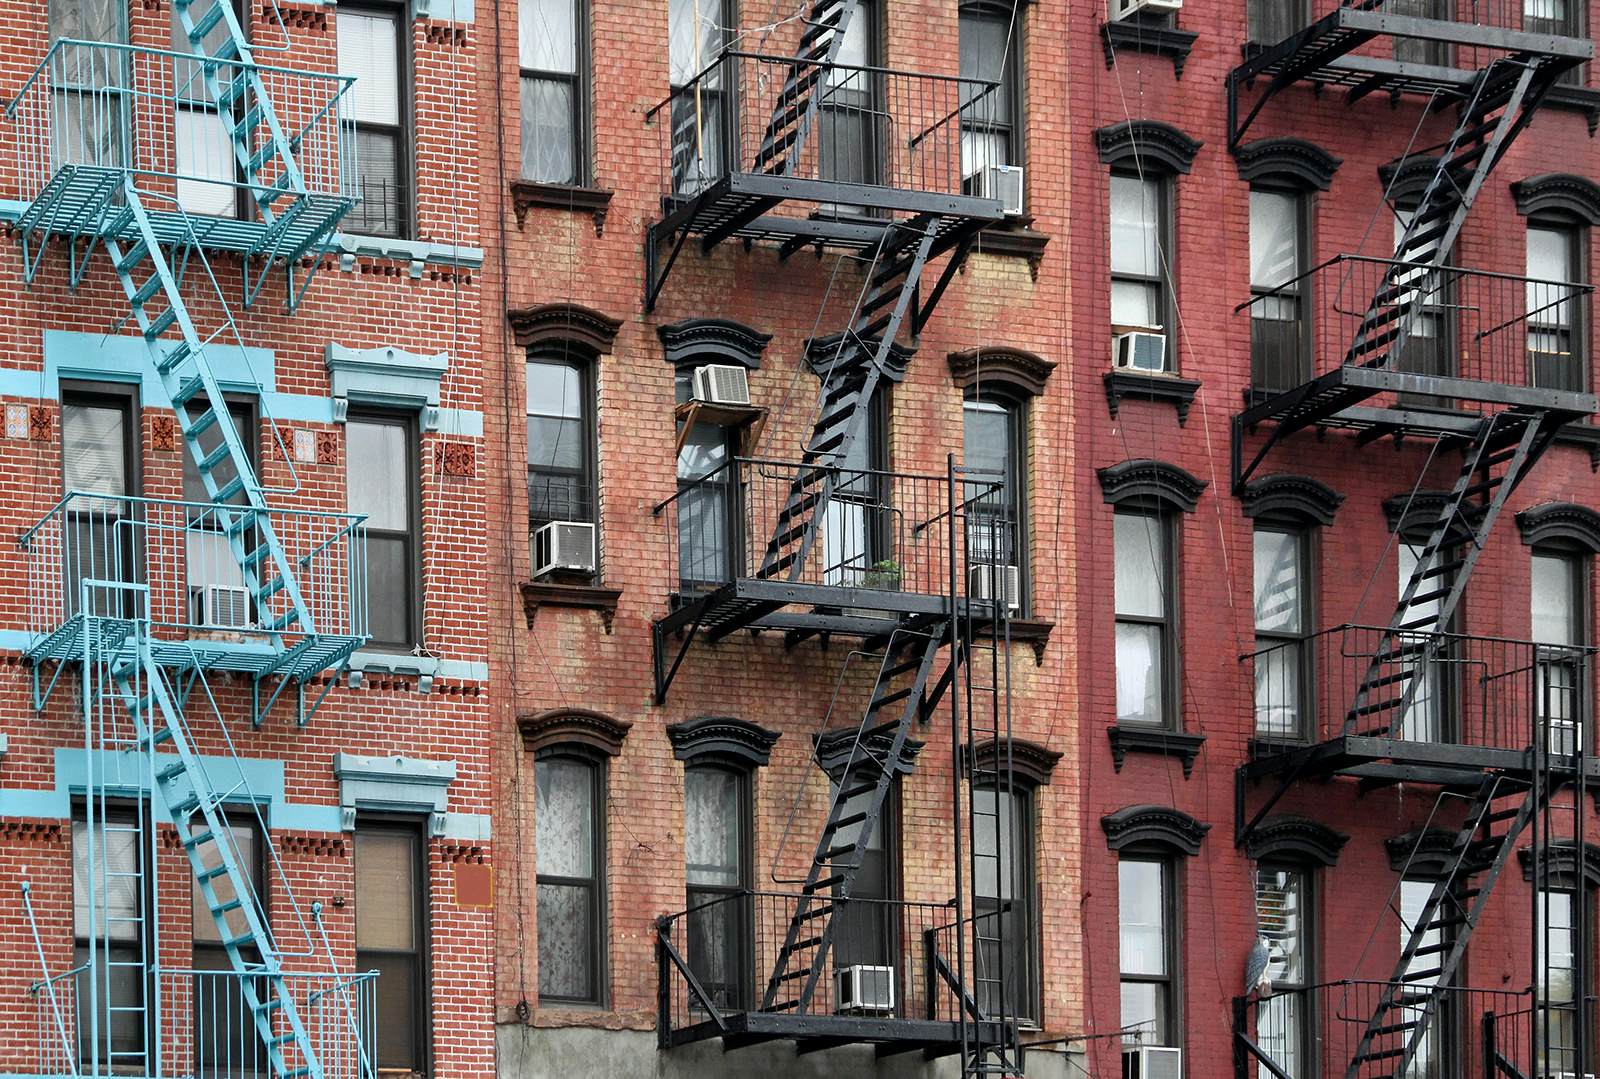 East Village & Lower East Side travel - Lonely Planet